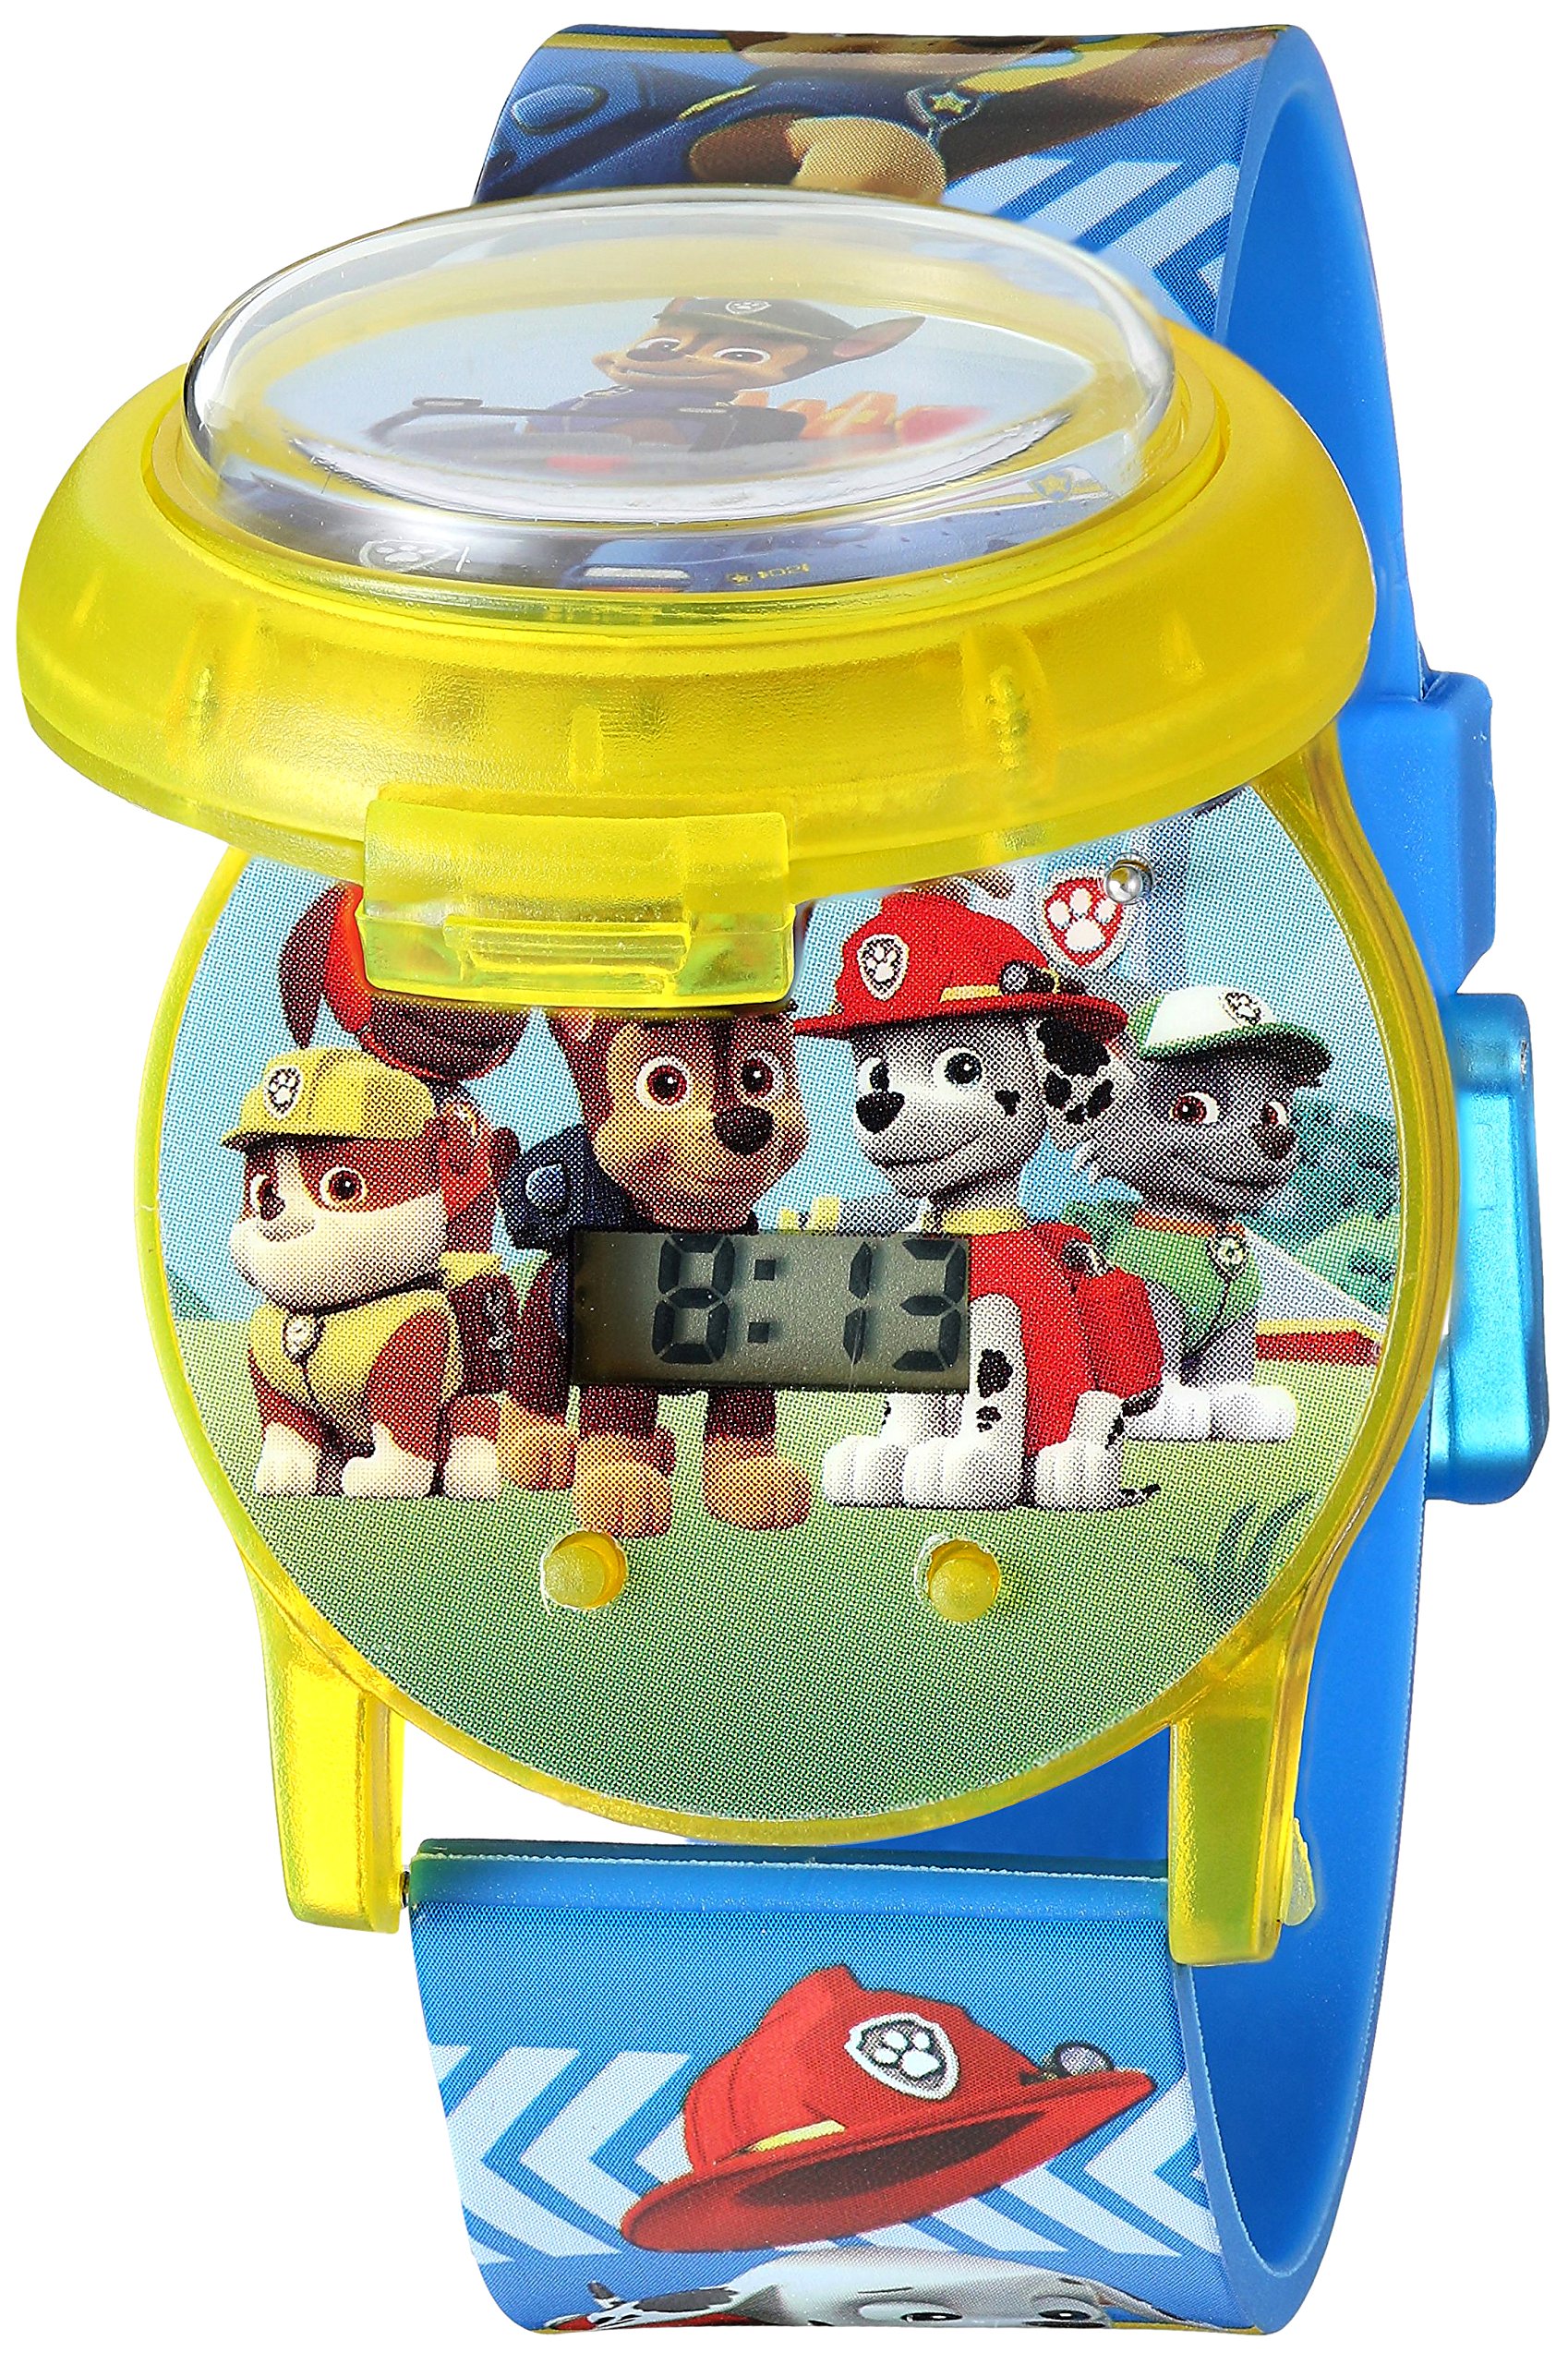 Accutime Kids Paw Patrol Digital LCD Quartz Wrist Watch, Cool Inexpensive Gift & Party Favor for Toddlers, Boys, Girls, Adults All Ages